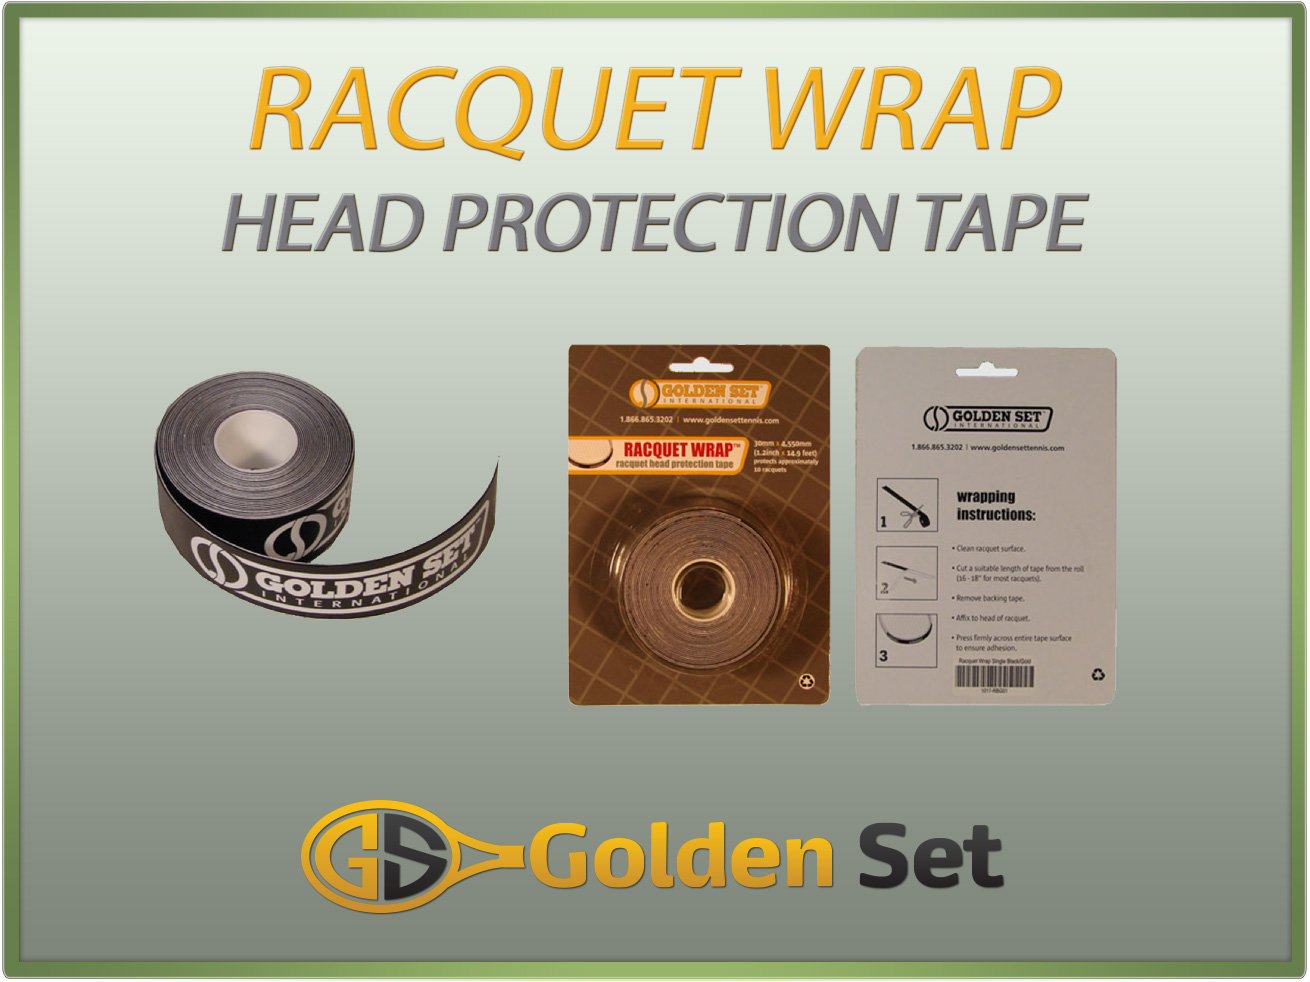 Racquet Wrap (racquet head protection tape), 12-Pack - Click Image to Close